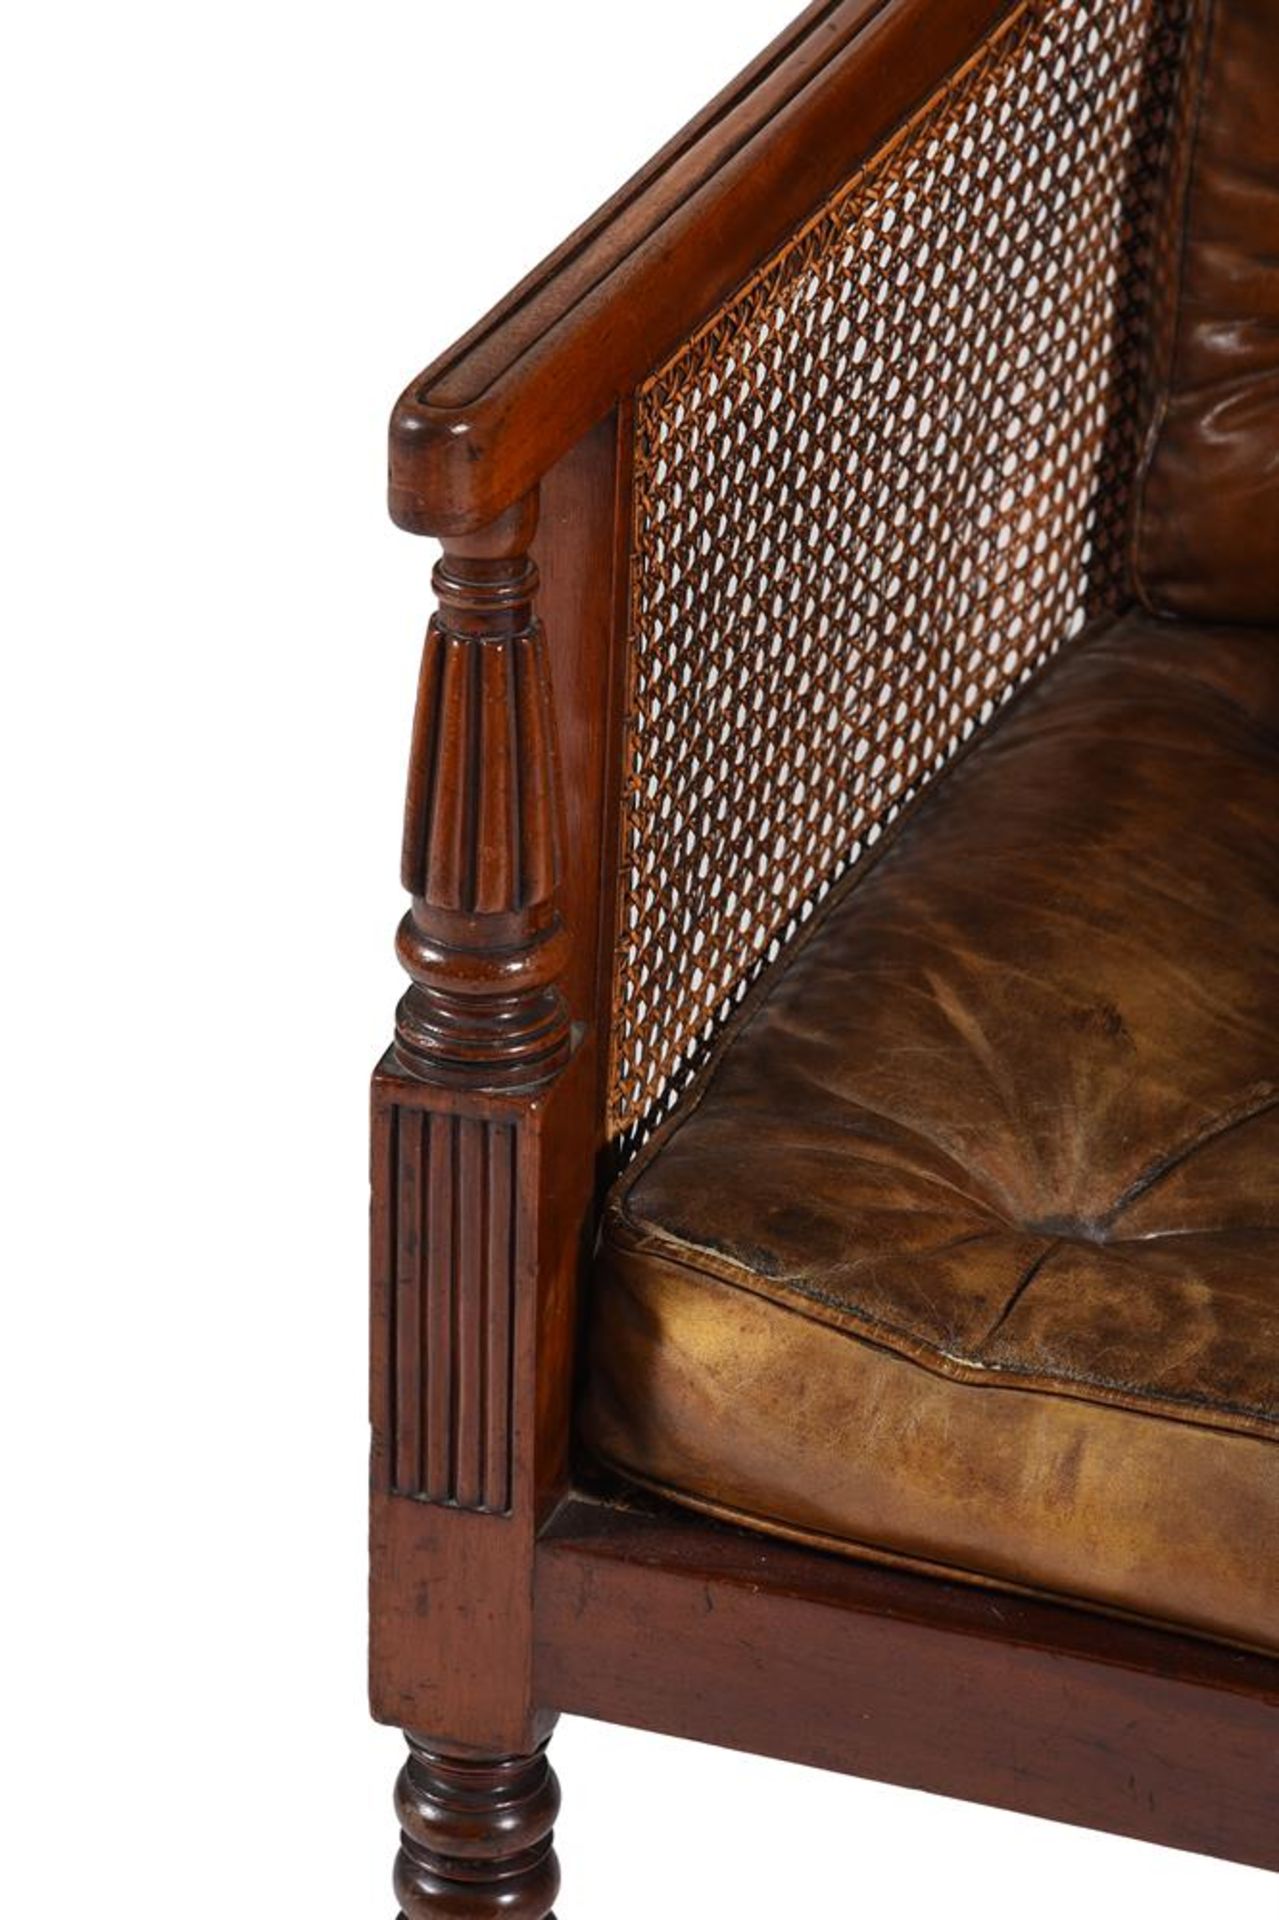 A GEORGE IV MAHOGANY LIBRARY ARMCHAIR IN THE MANNER OF GILLOWS - Image 4 of 7